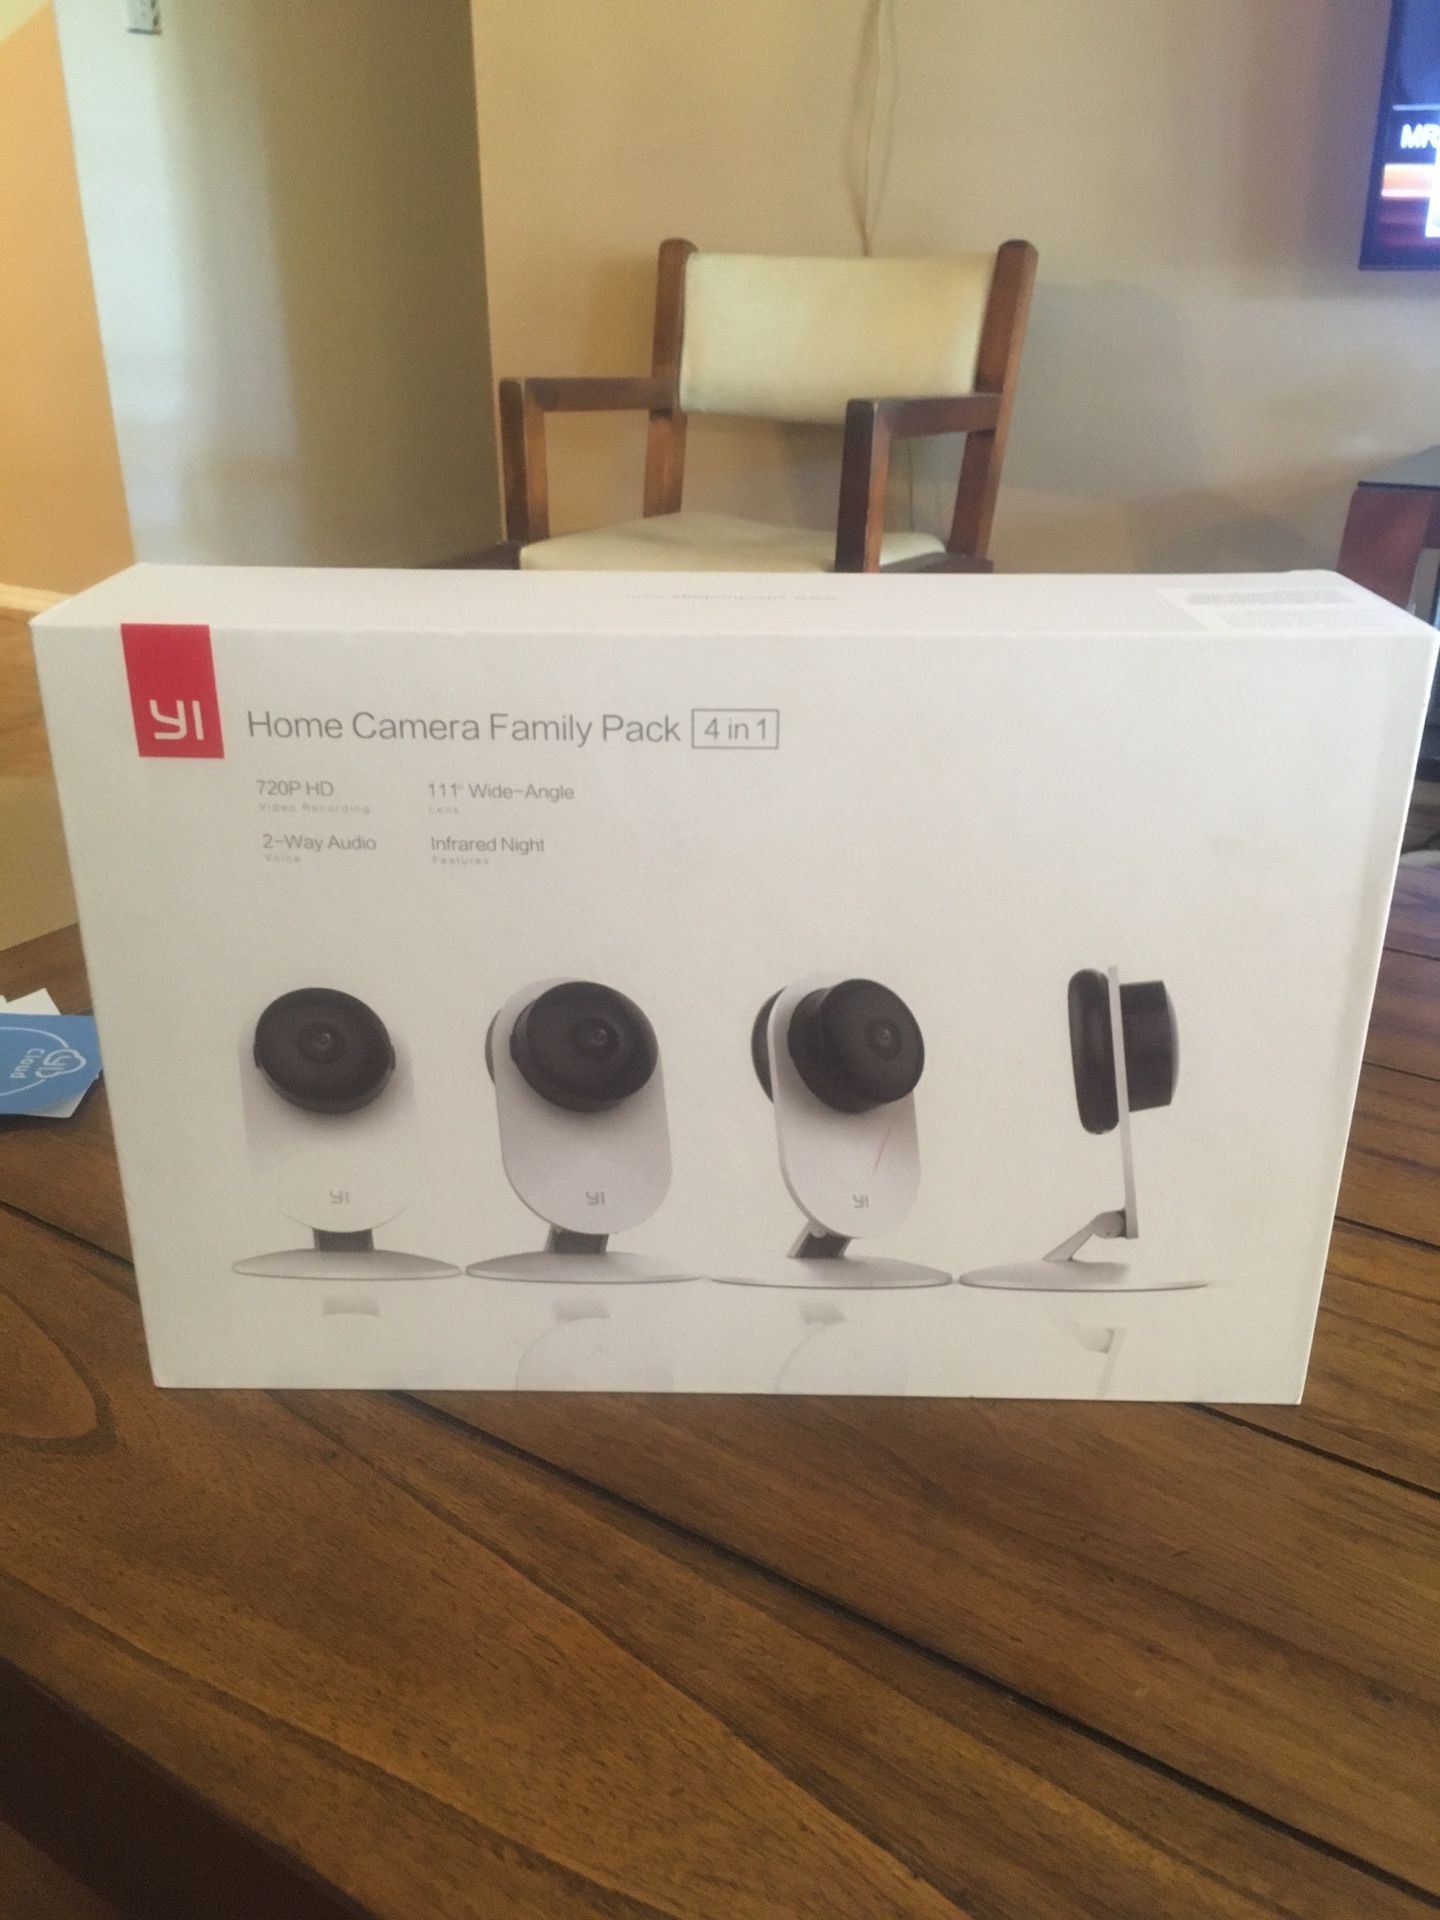 Yi Home Camera family pack (4 in 1)